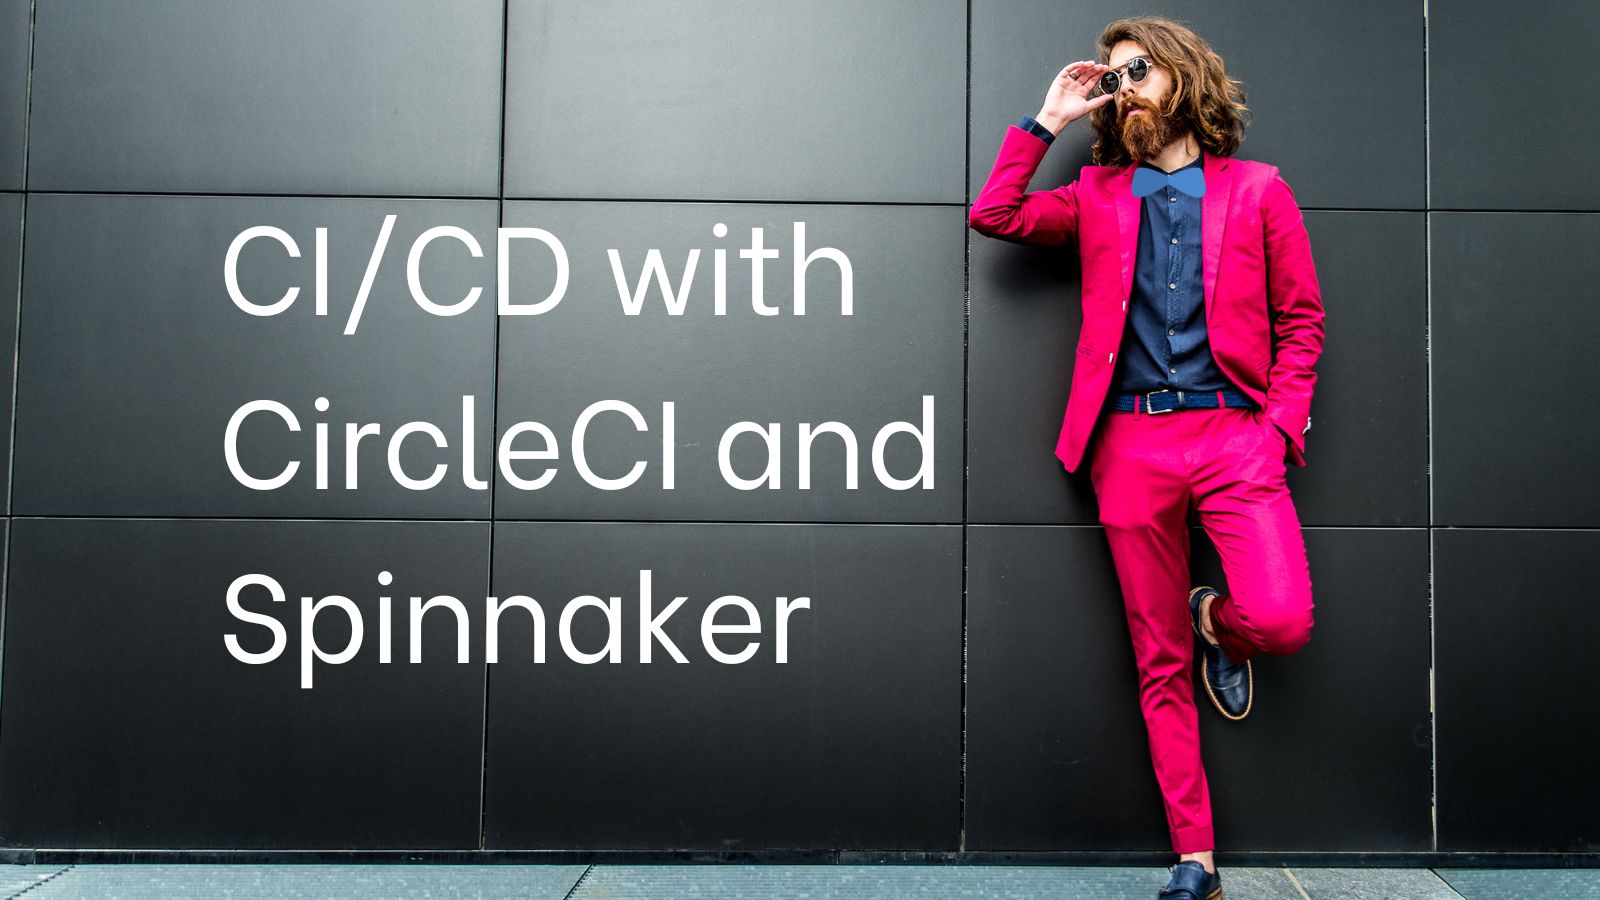 CI/CD Java Microservices with CircleCI and Spinnaker